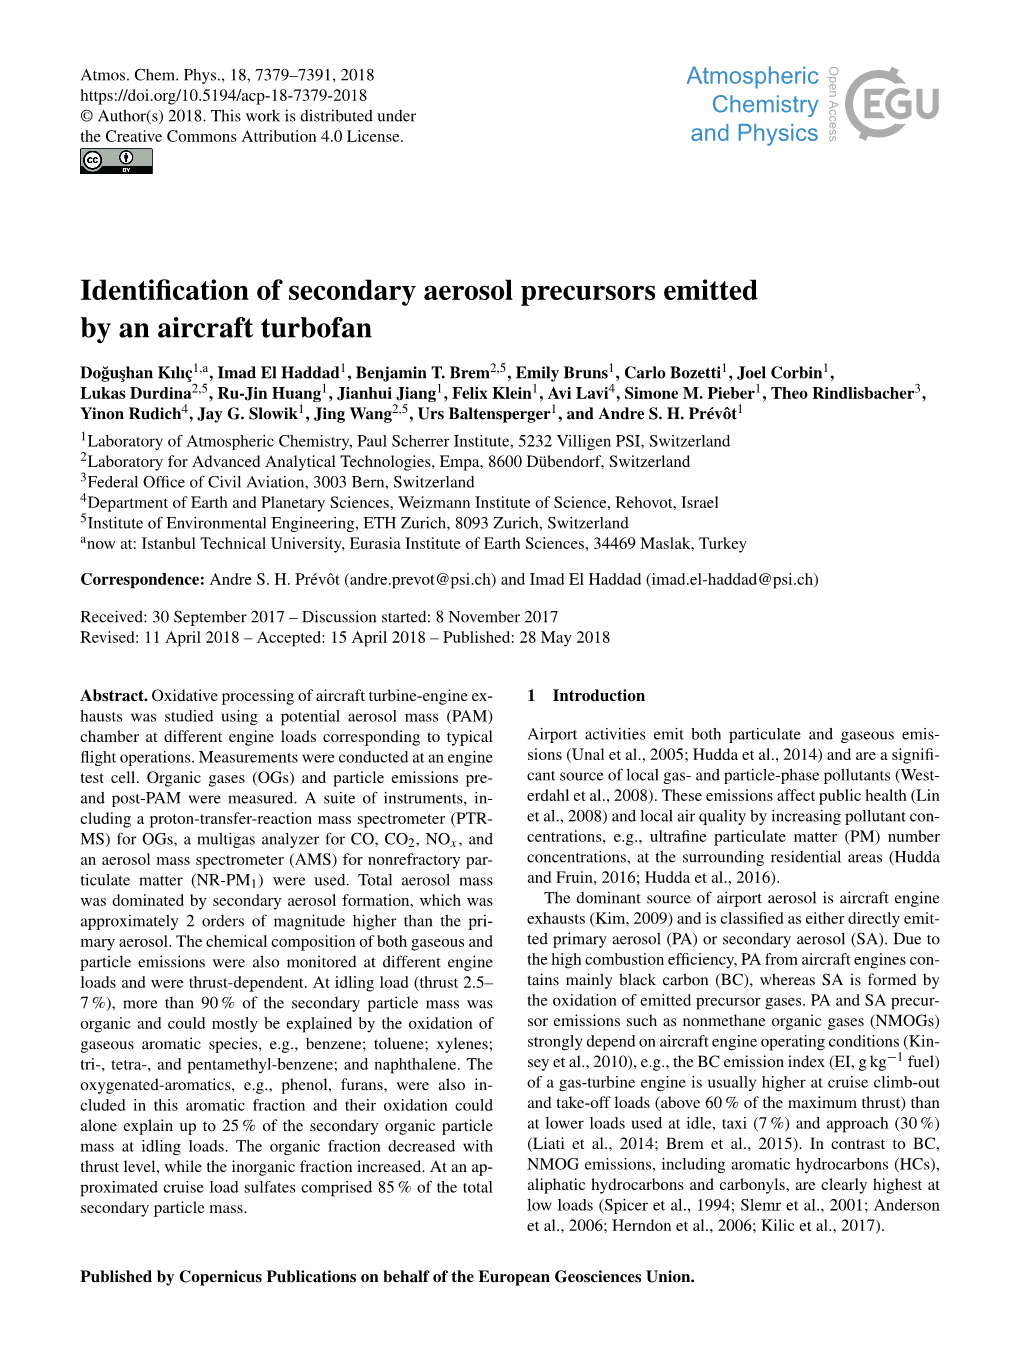 Identification of Secondary Aerosol Precursors Emitted by an Aircraft